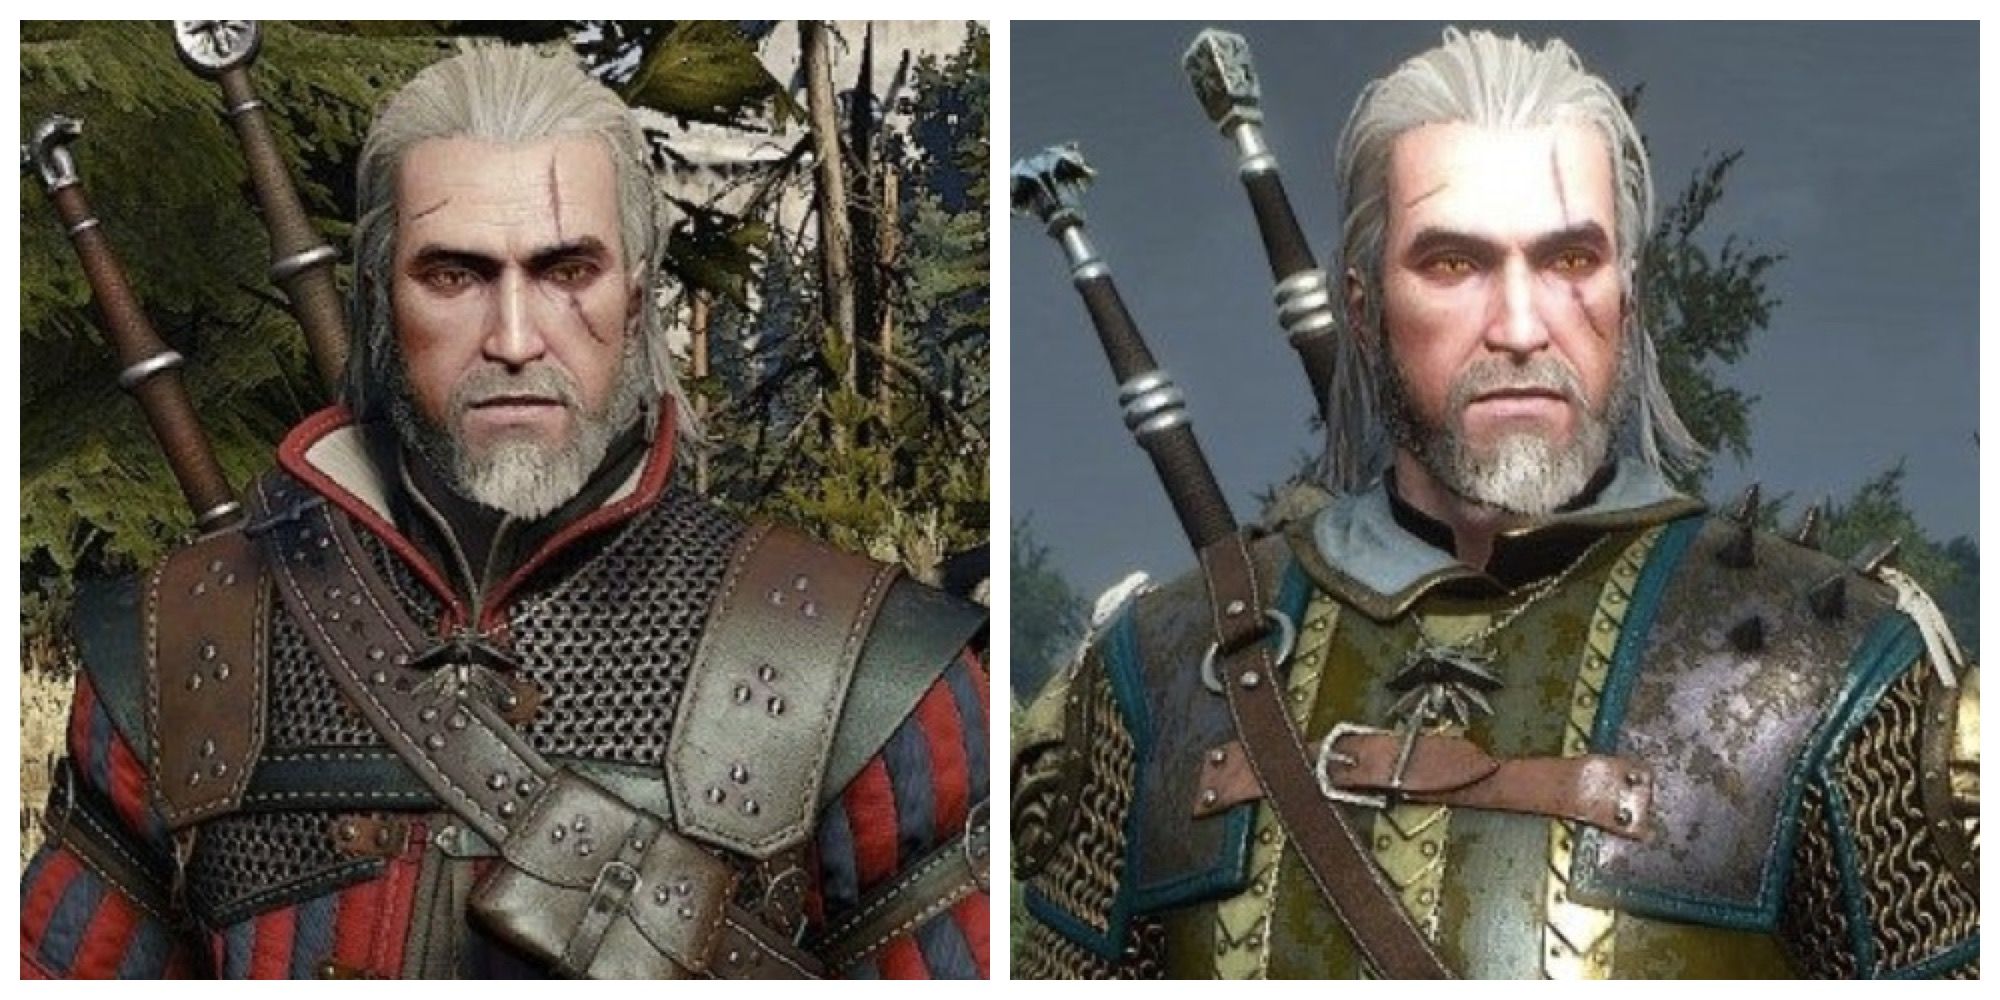 Geralt of Rivia shows off the Wolf School Gear, one version of Geralt wears the Griffin School Gear